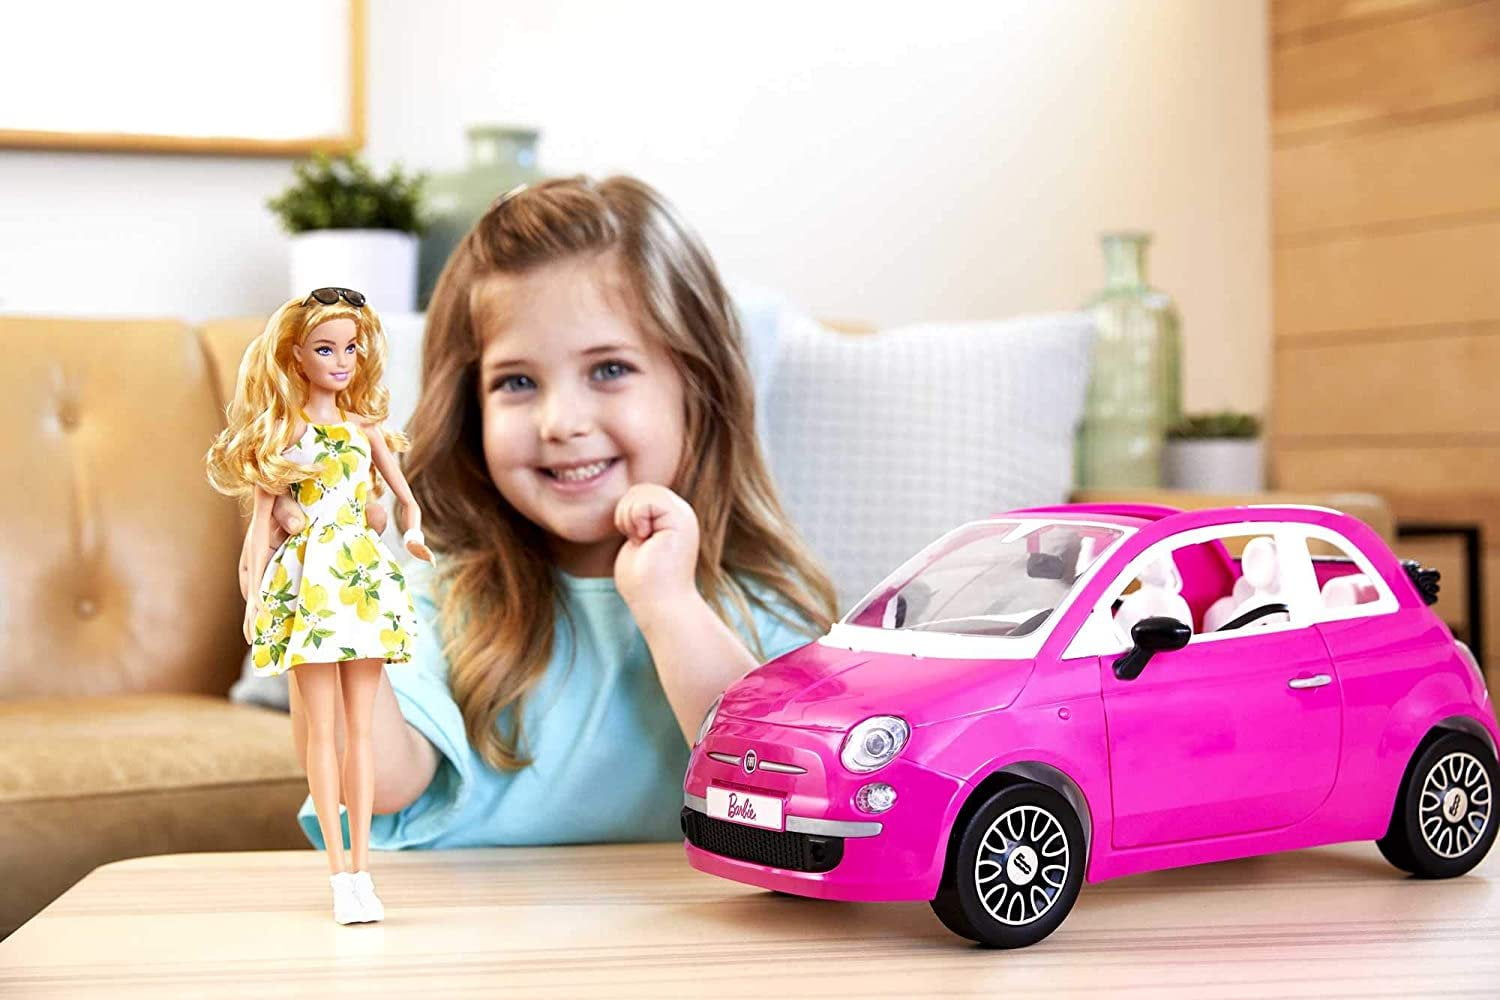 Barbie Fiat 500 Car and Doll Playset - Pink Convertible for Child's  Imaginative Play